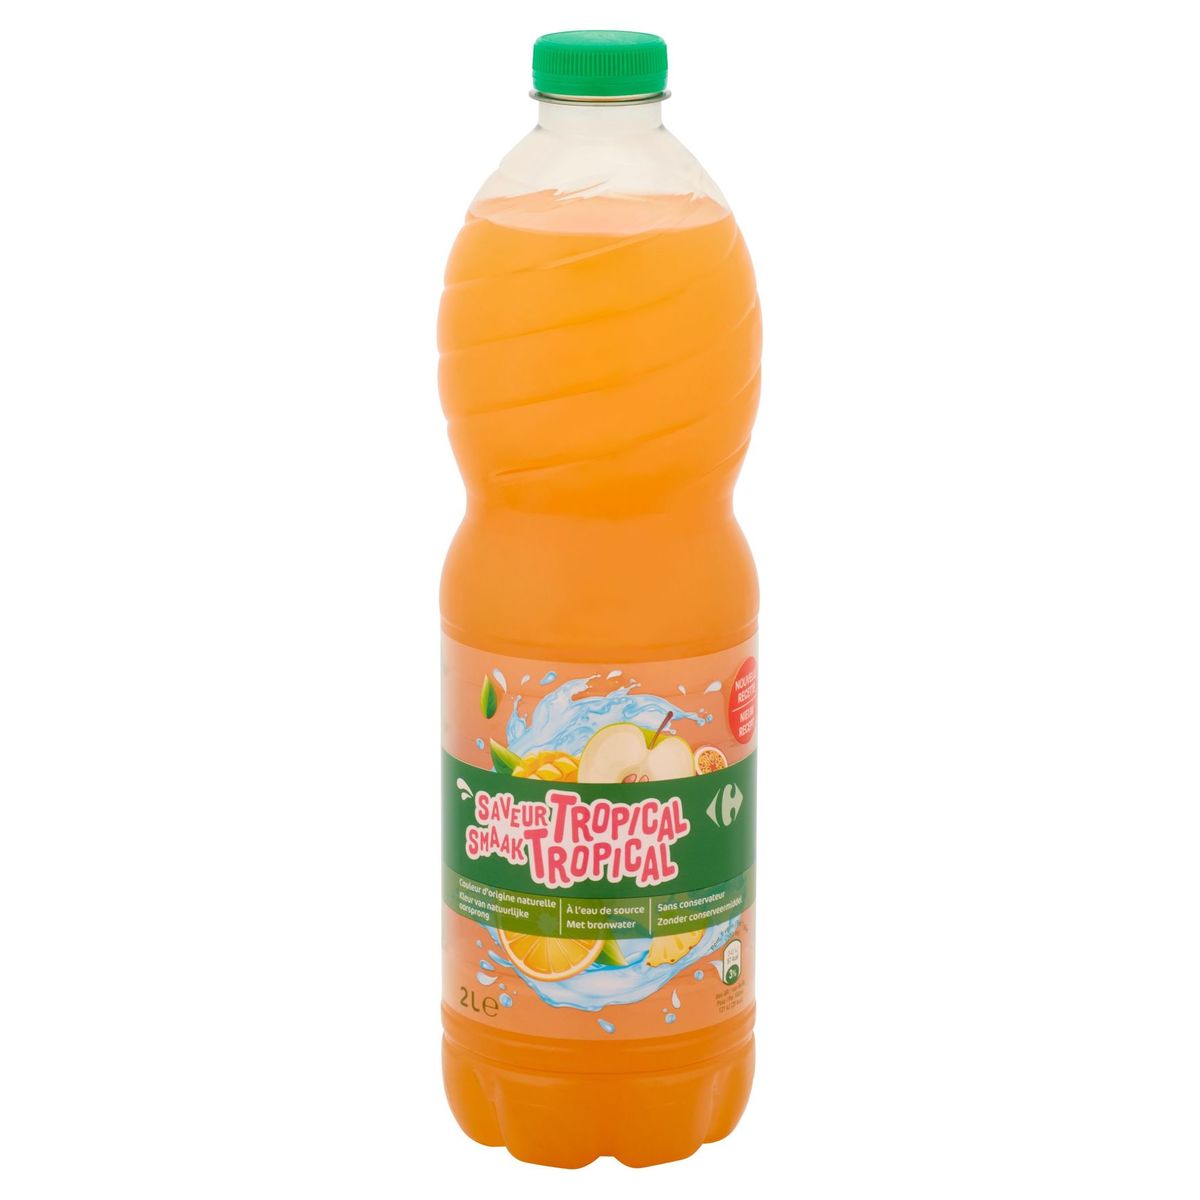 Carrefour Tropical Smaak 2 L